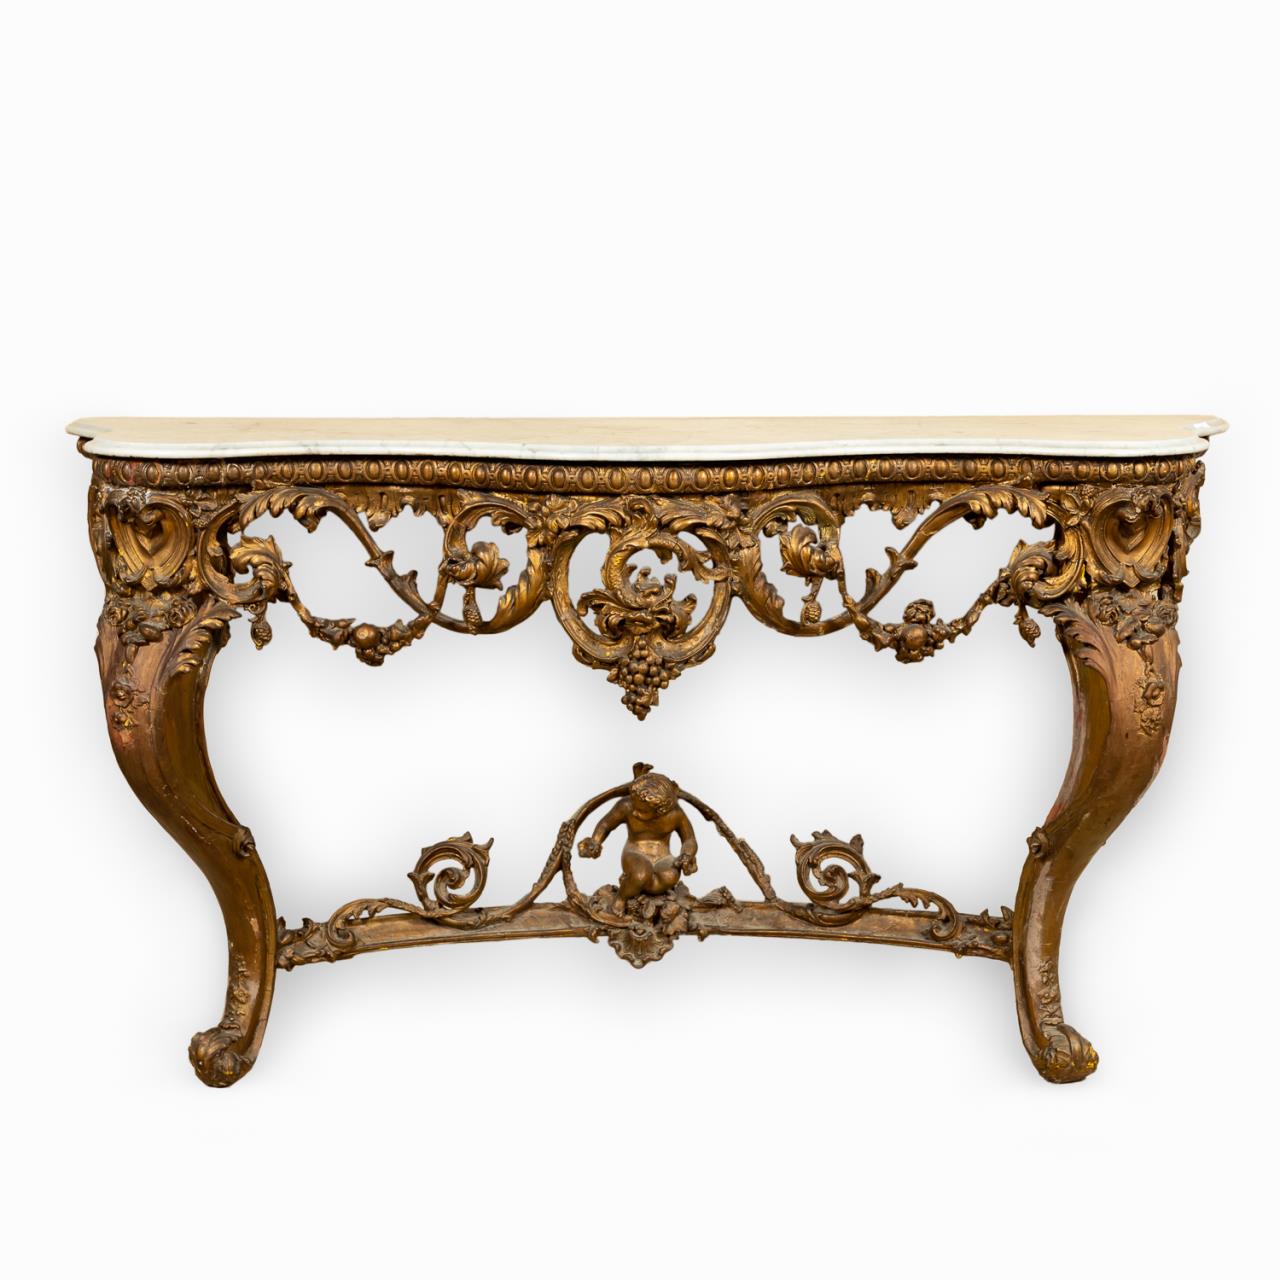 LOUIS XV-STYLE MARBLE TOP GILTWOOD